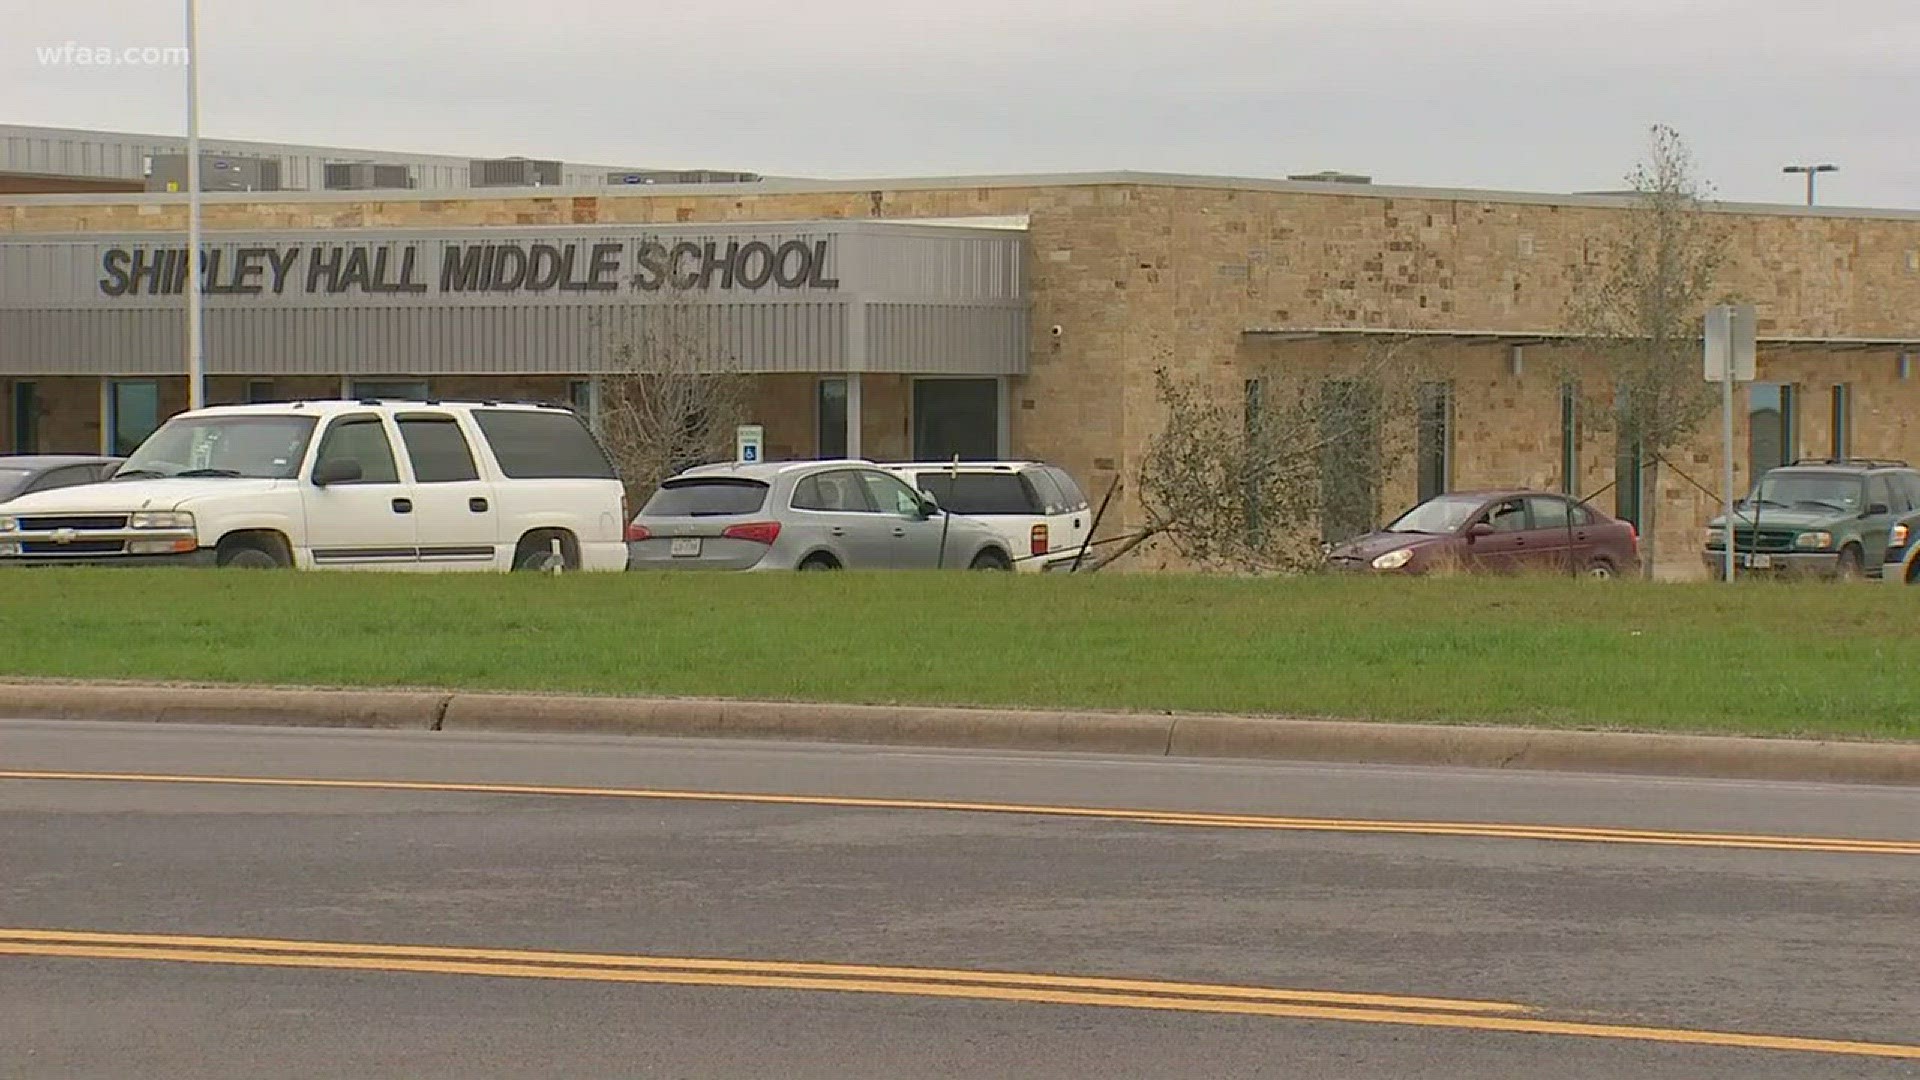 The student was a 14-year-old boy at Hall Middle School.